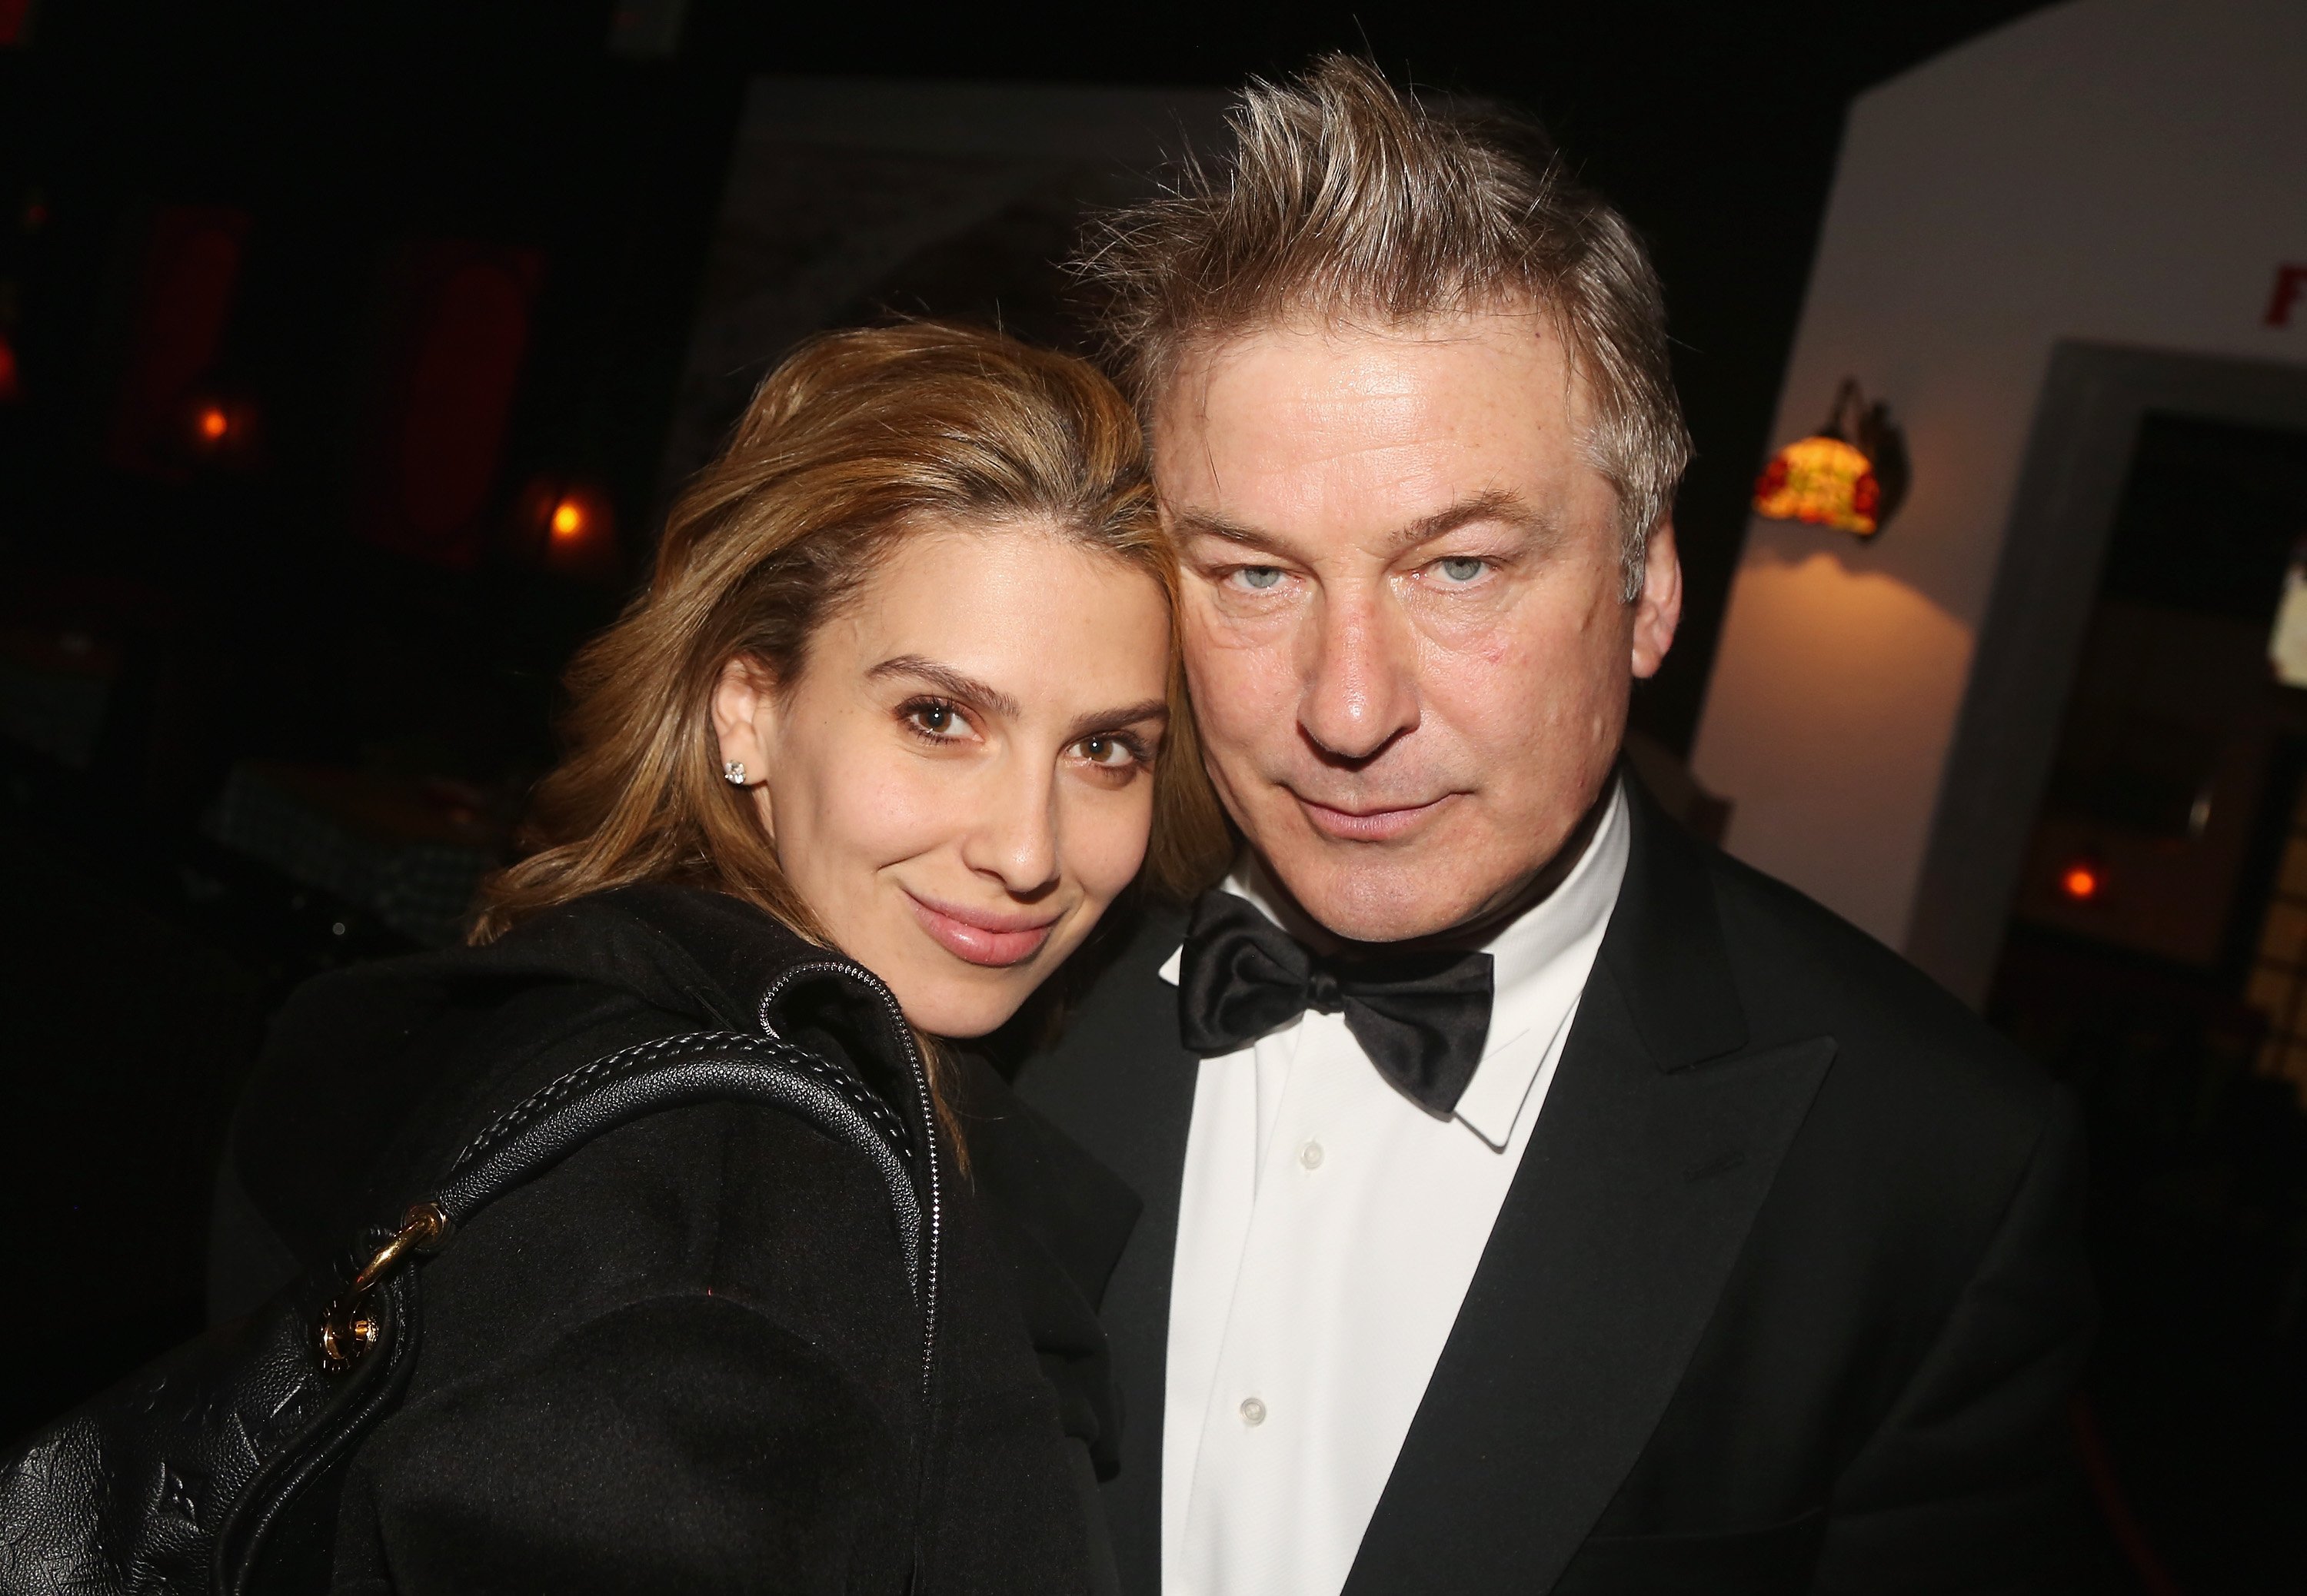 Hilaria and Alec Baldwin pictured at the after party for The Roundabout Theatre Company benefit performance of "Twentieth Century," 2019, New York City. | Photo: Getty Images